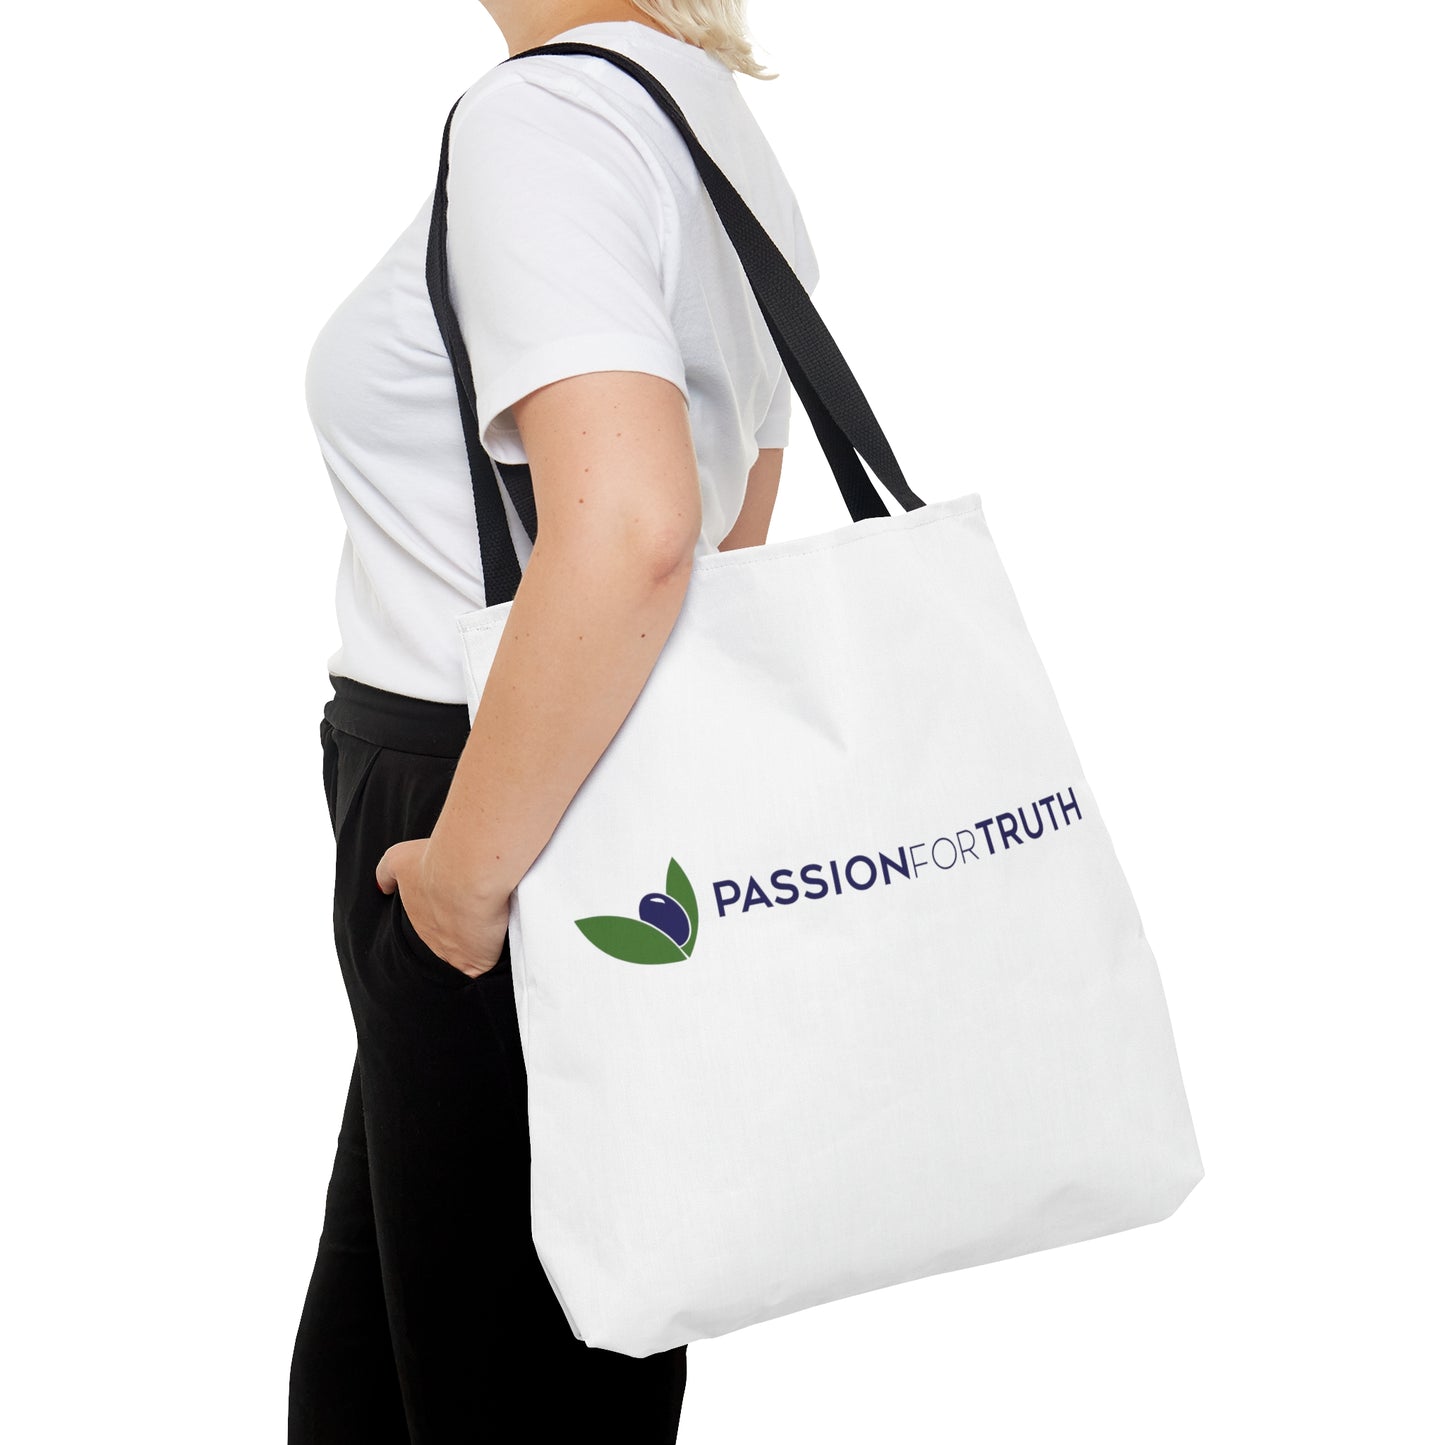 Passion For Truth, Tote Bag